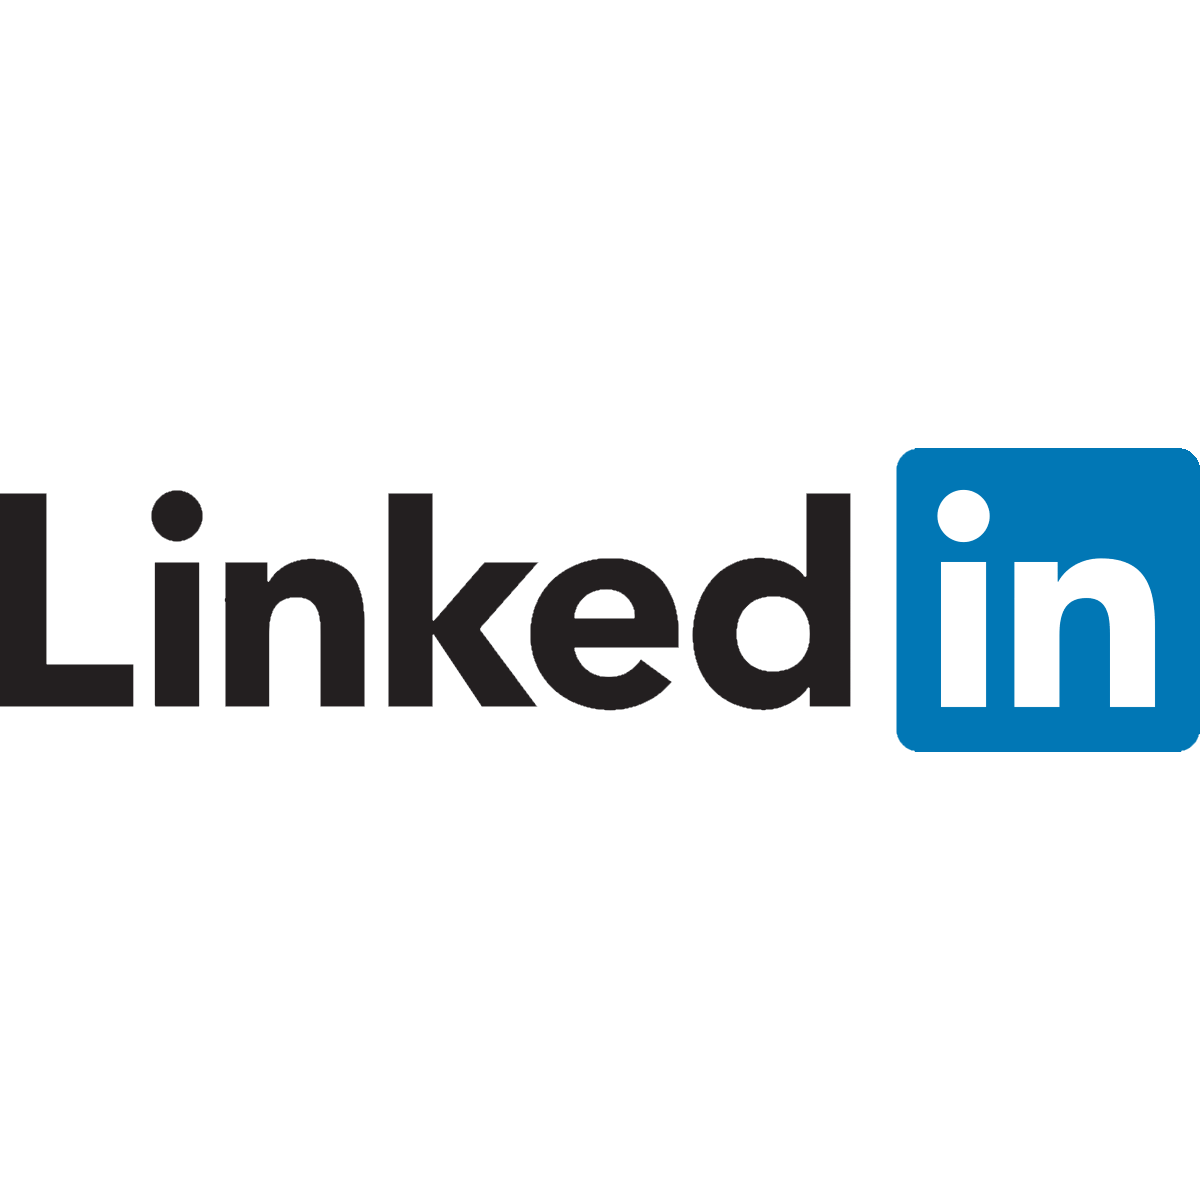 LinkedIn is finally moving its infrastructure to Microsoft Azure